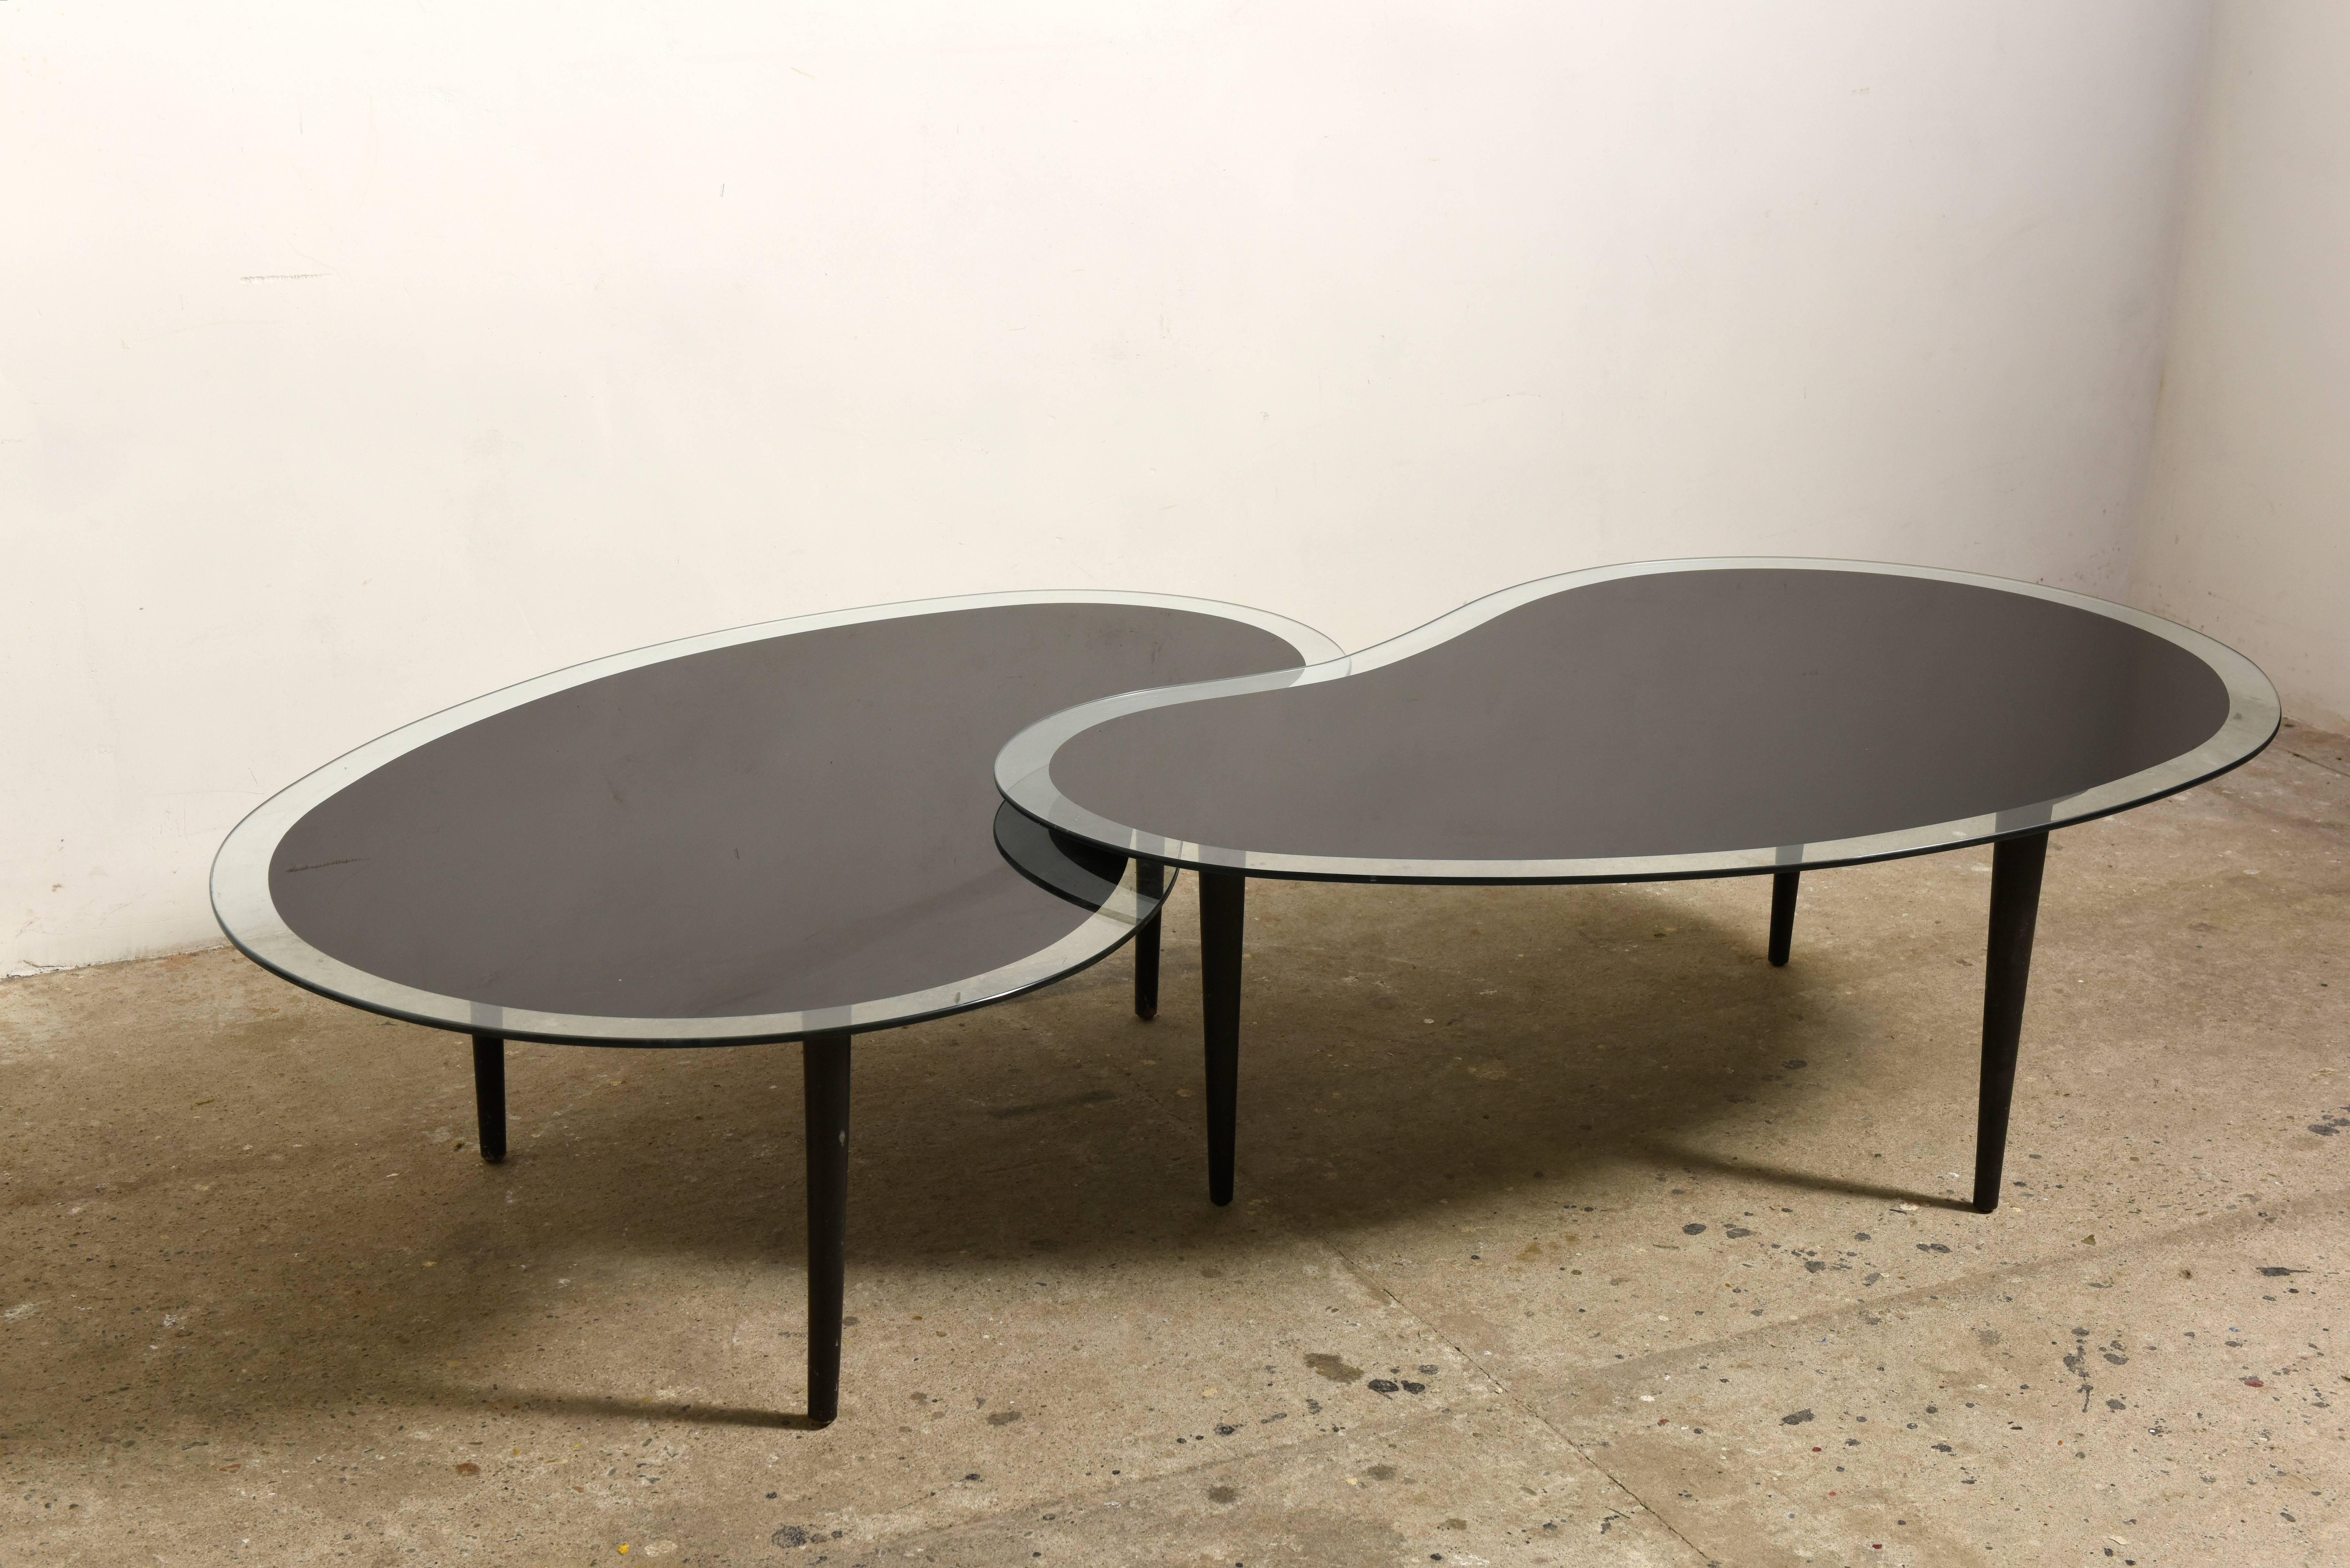 Organic vintage nesting kidney shaped black lacquer elevated glass top coffee tables with adjustable tapered legs black lacquered. The traditional form is modified so that two tables can link or nest together to create one larger form or can be